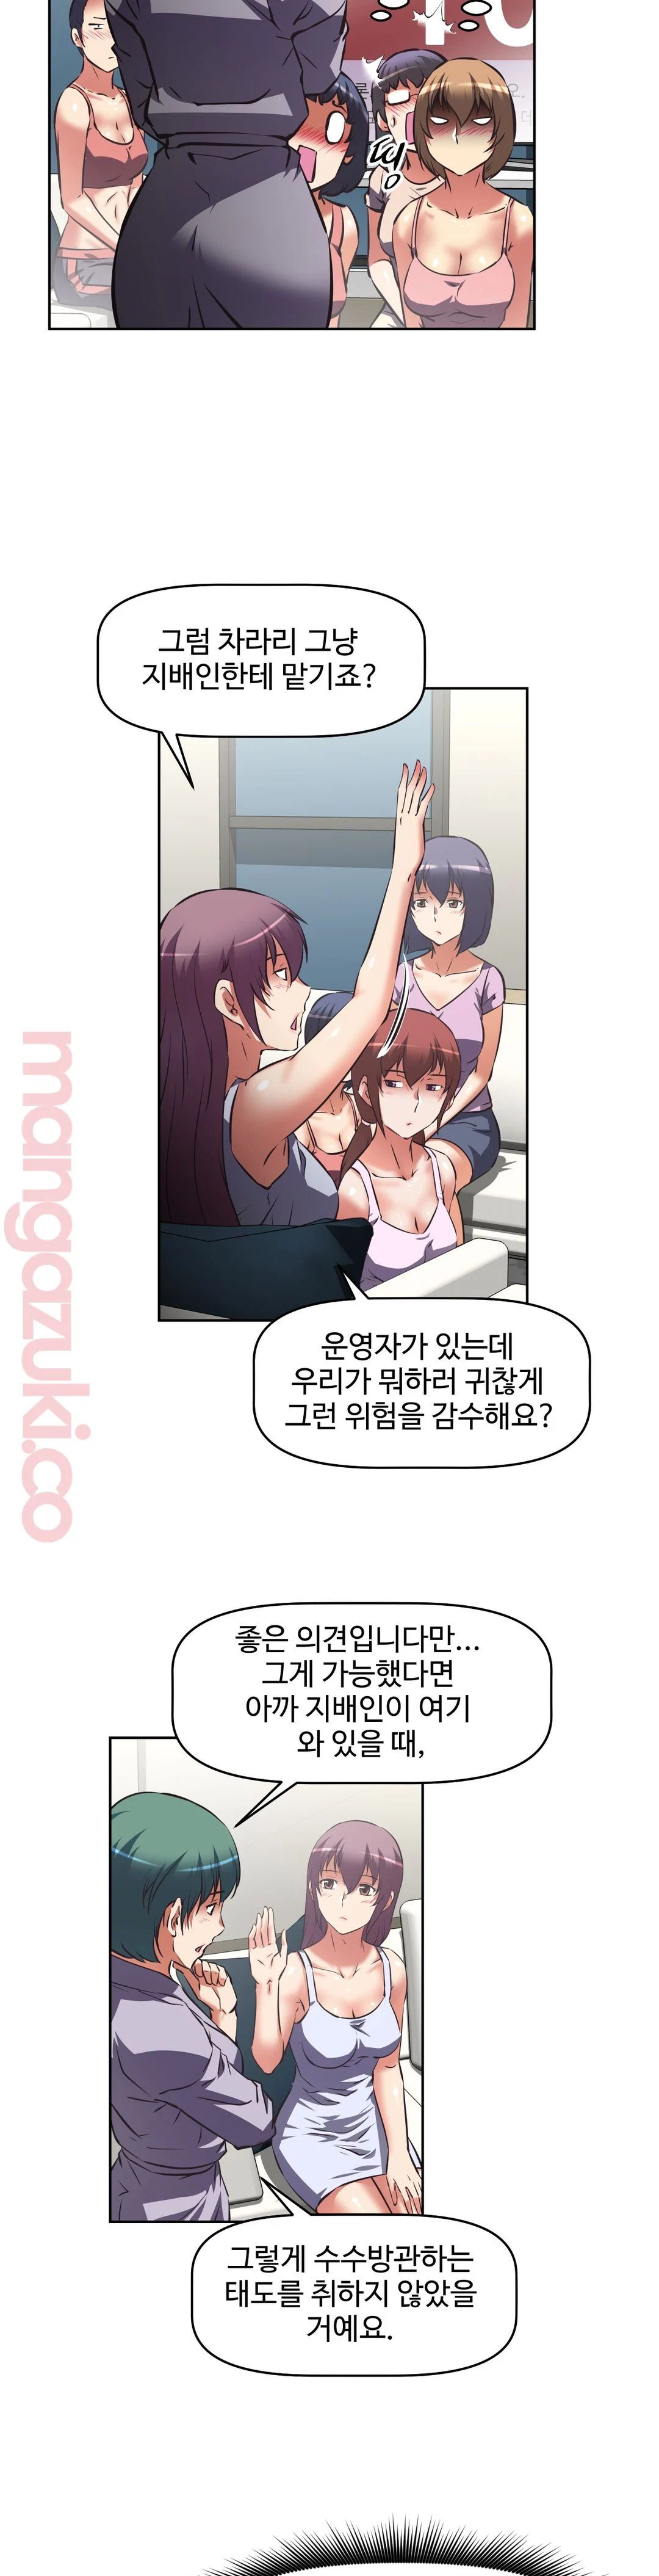 The Girls’ Nest Raw - Chapter 16 Page 9